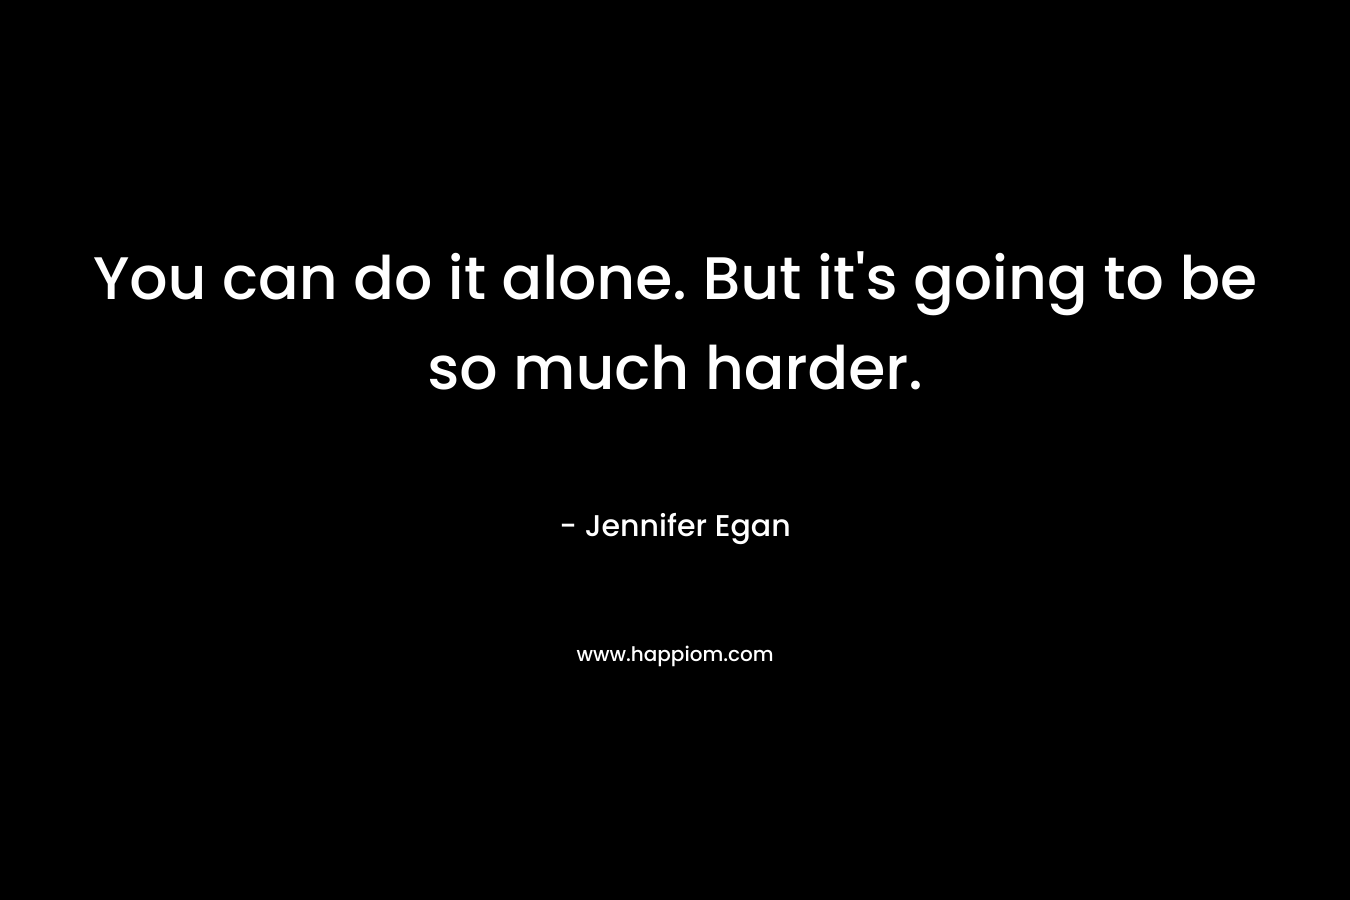 You can do it alone. But it’s going to be so much harder. – Jennifer Egan